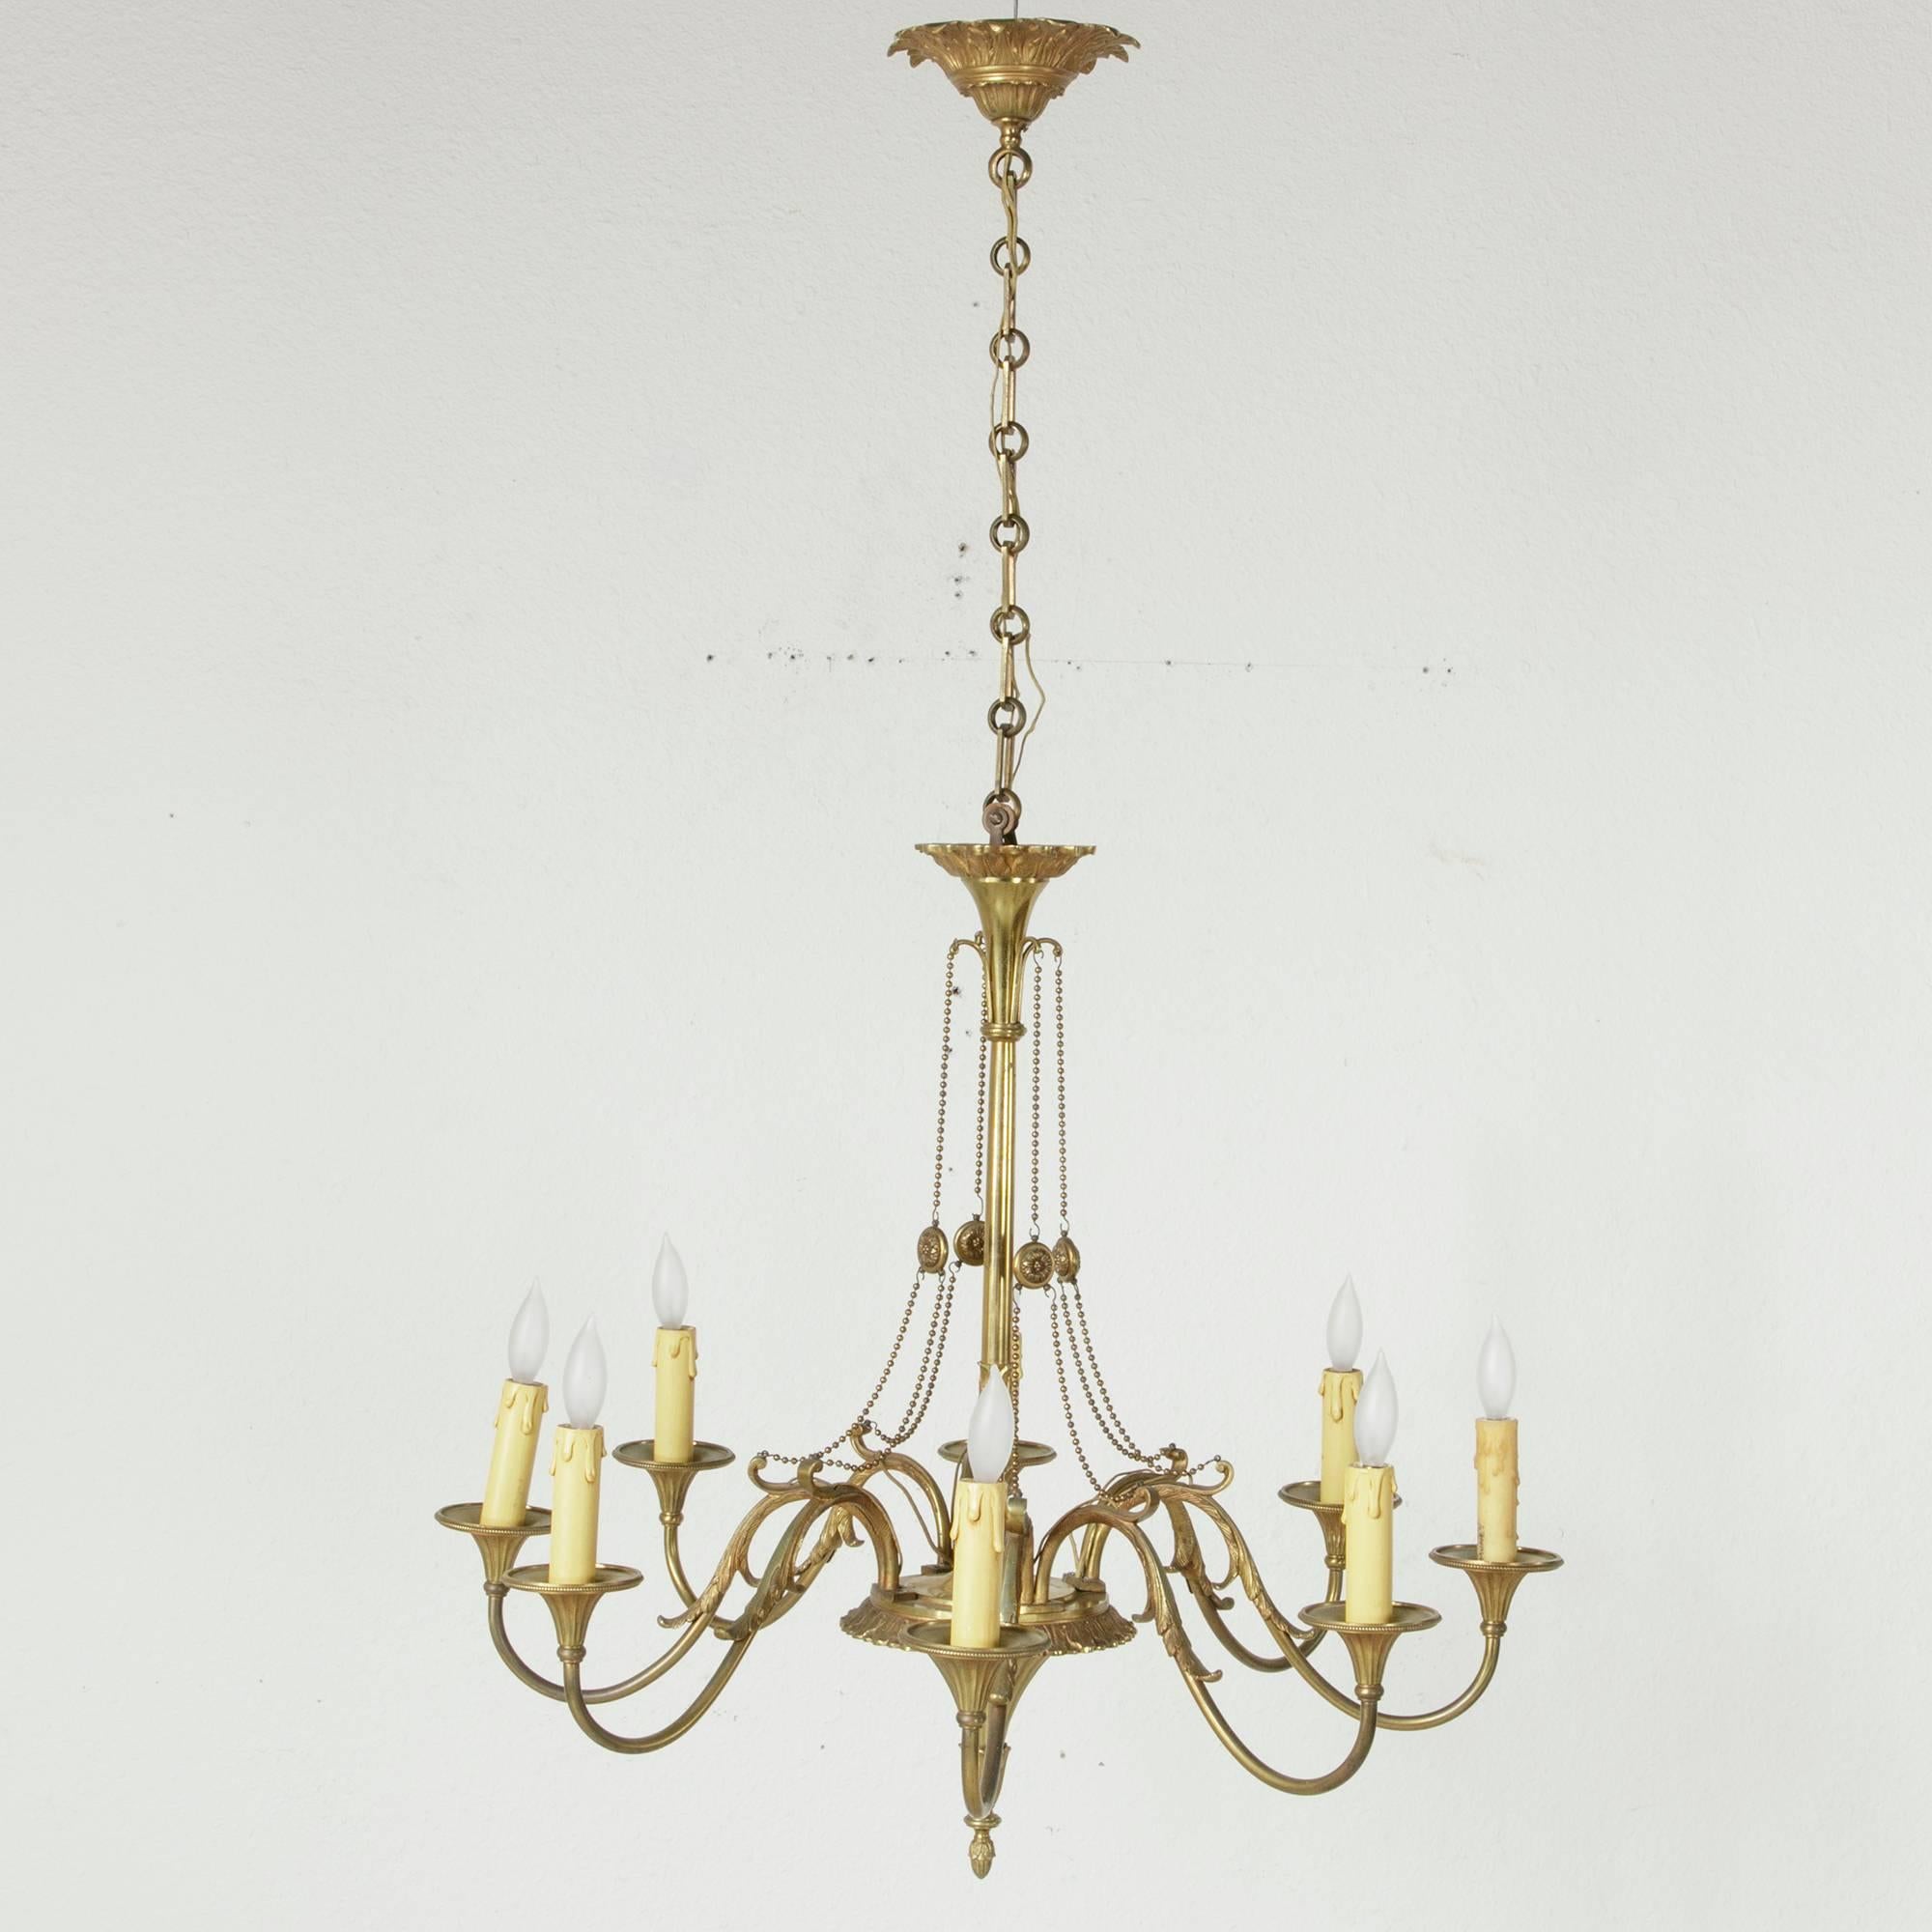 Mid-Century Modern meets Louis XVI in this large-scale bronze chandelier from Versailles. Eight gracefully curved arms detailed with acanthus leaves surround a central column festooned with delicate beading. The acanthus leaf motif is repeated in